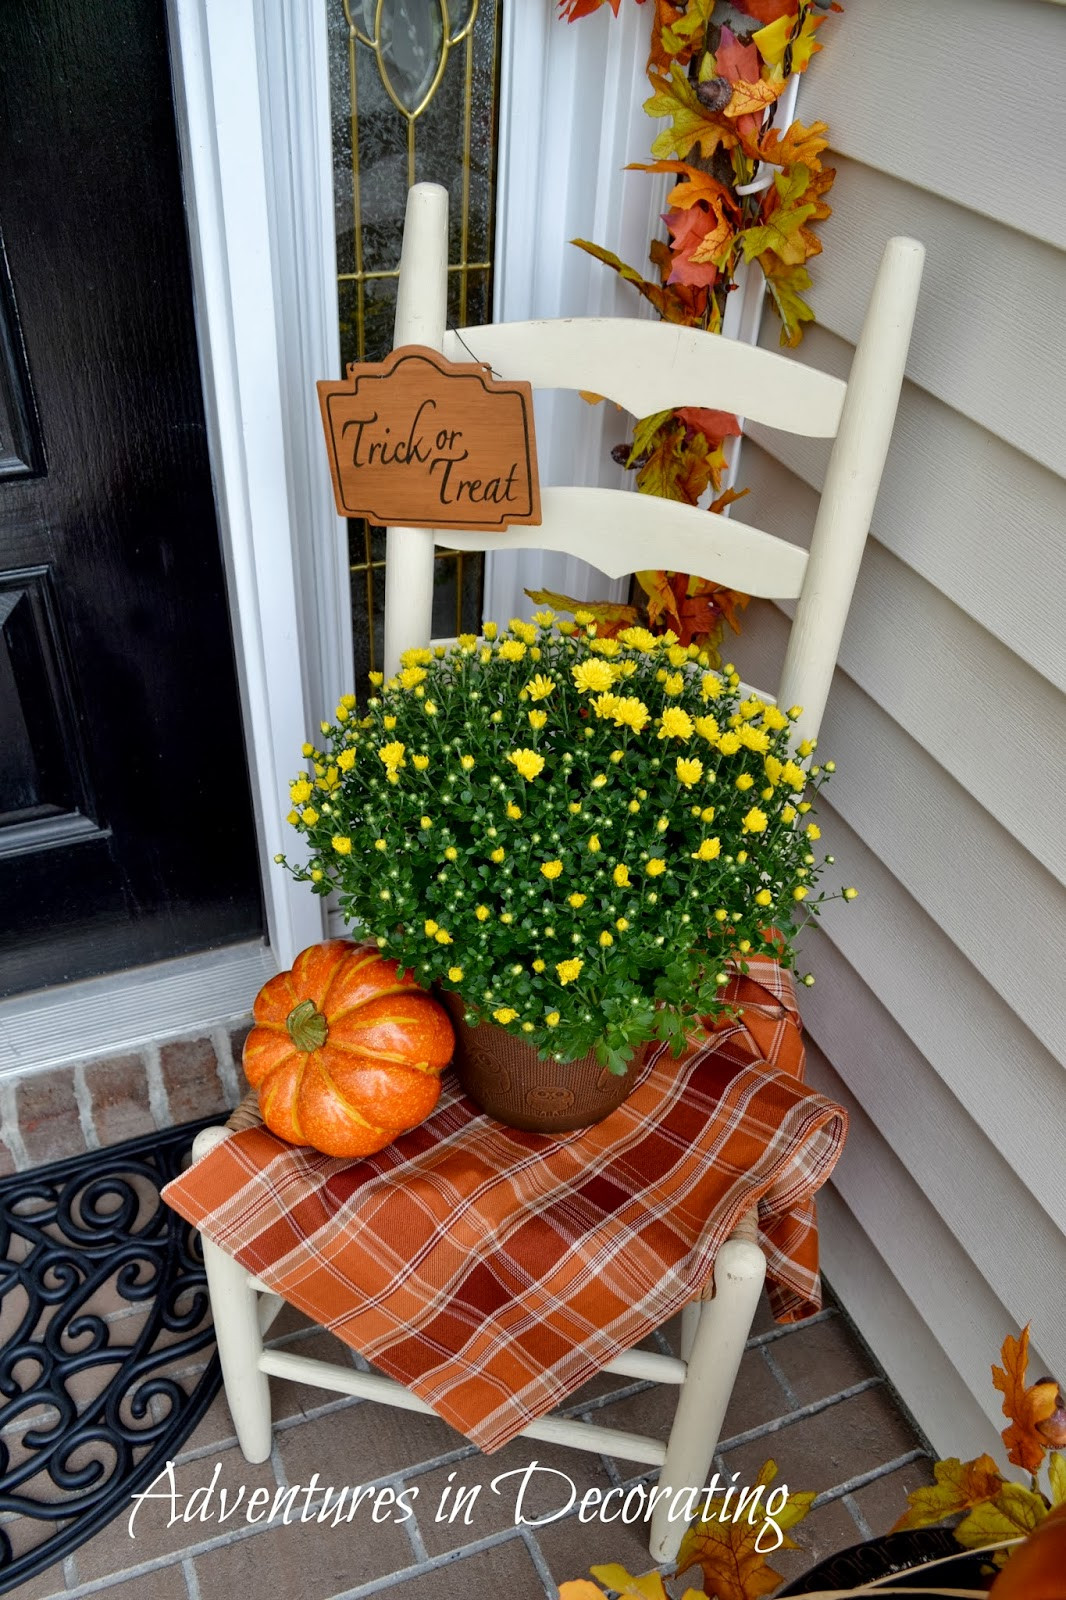 Fall Decorations Front Porch
 Adventures in Decorating Our Fall Front Porch